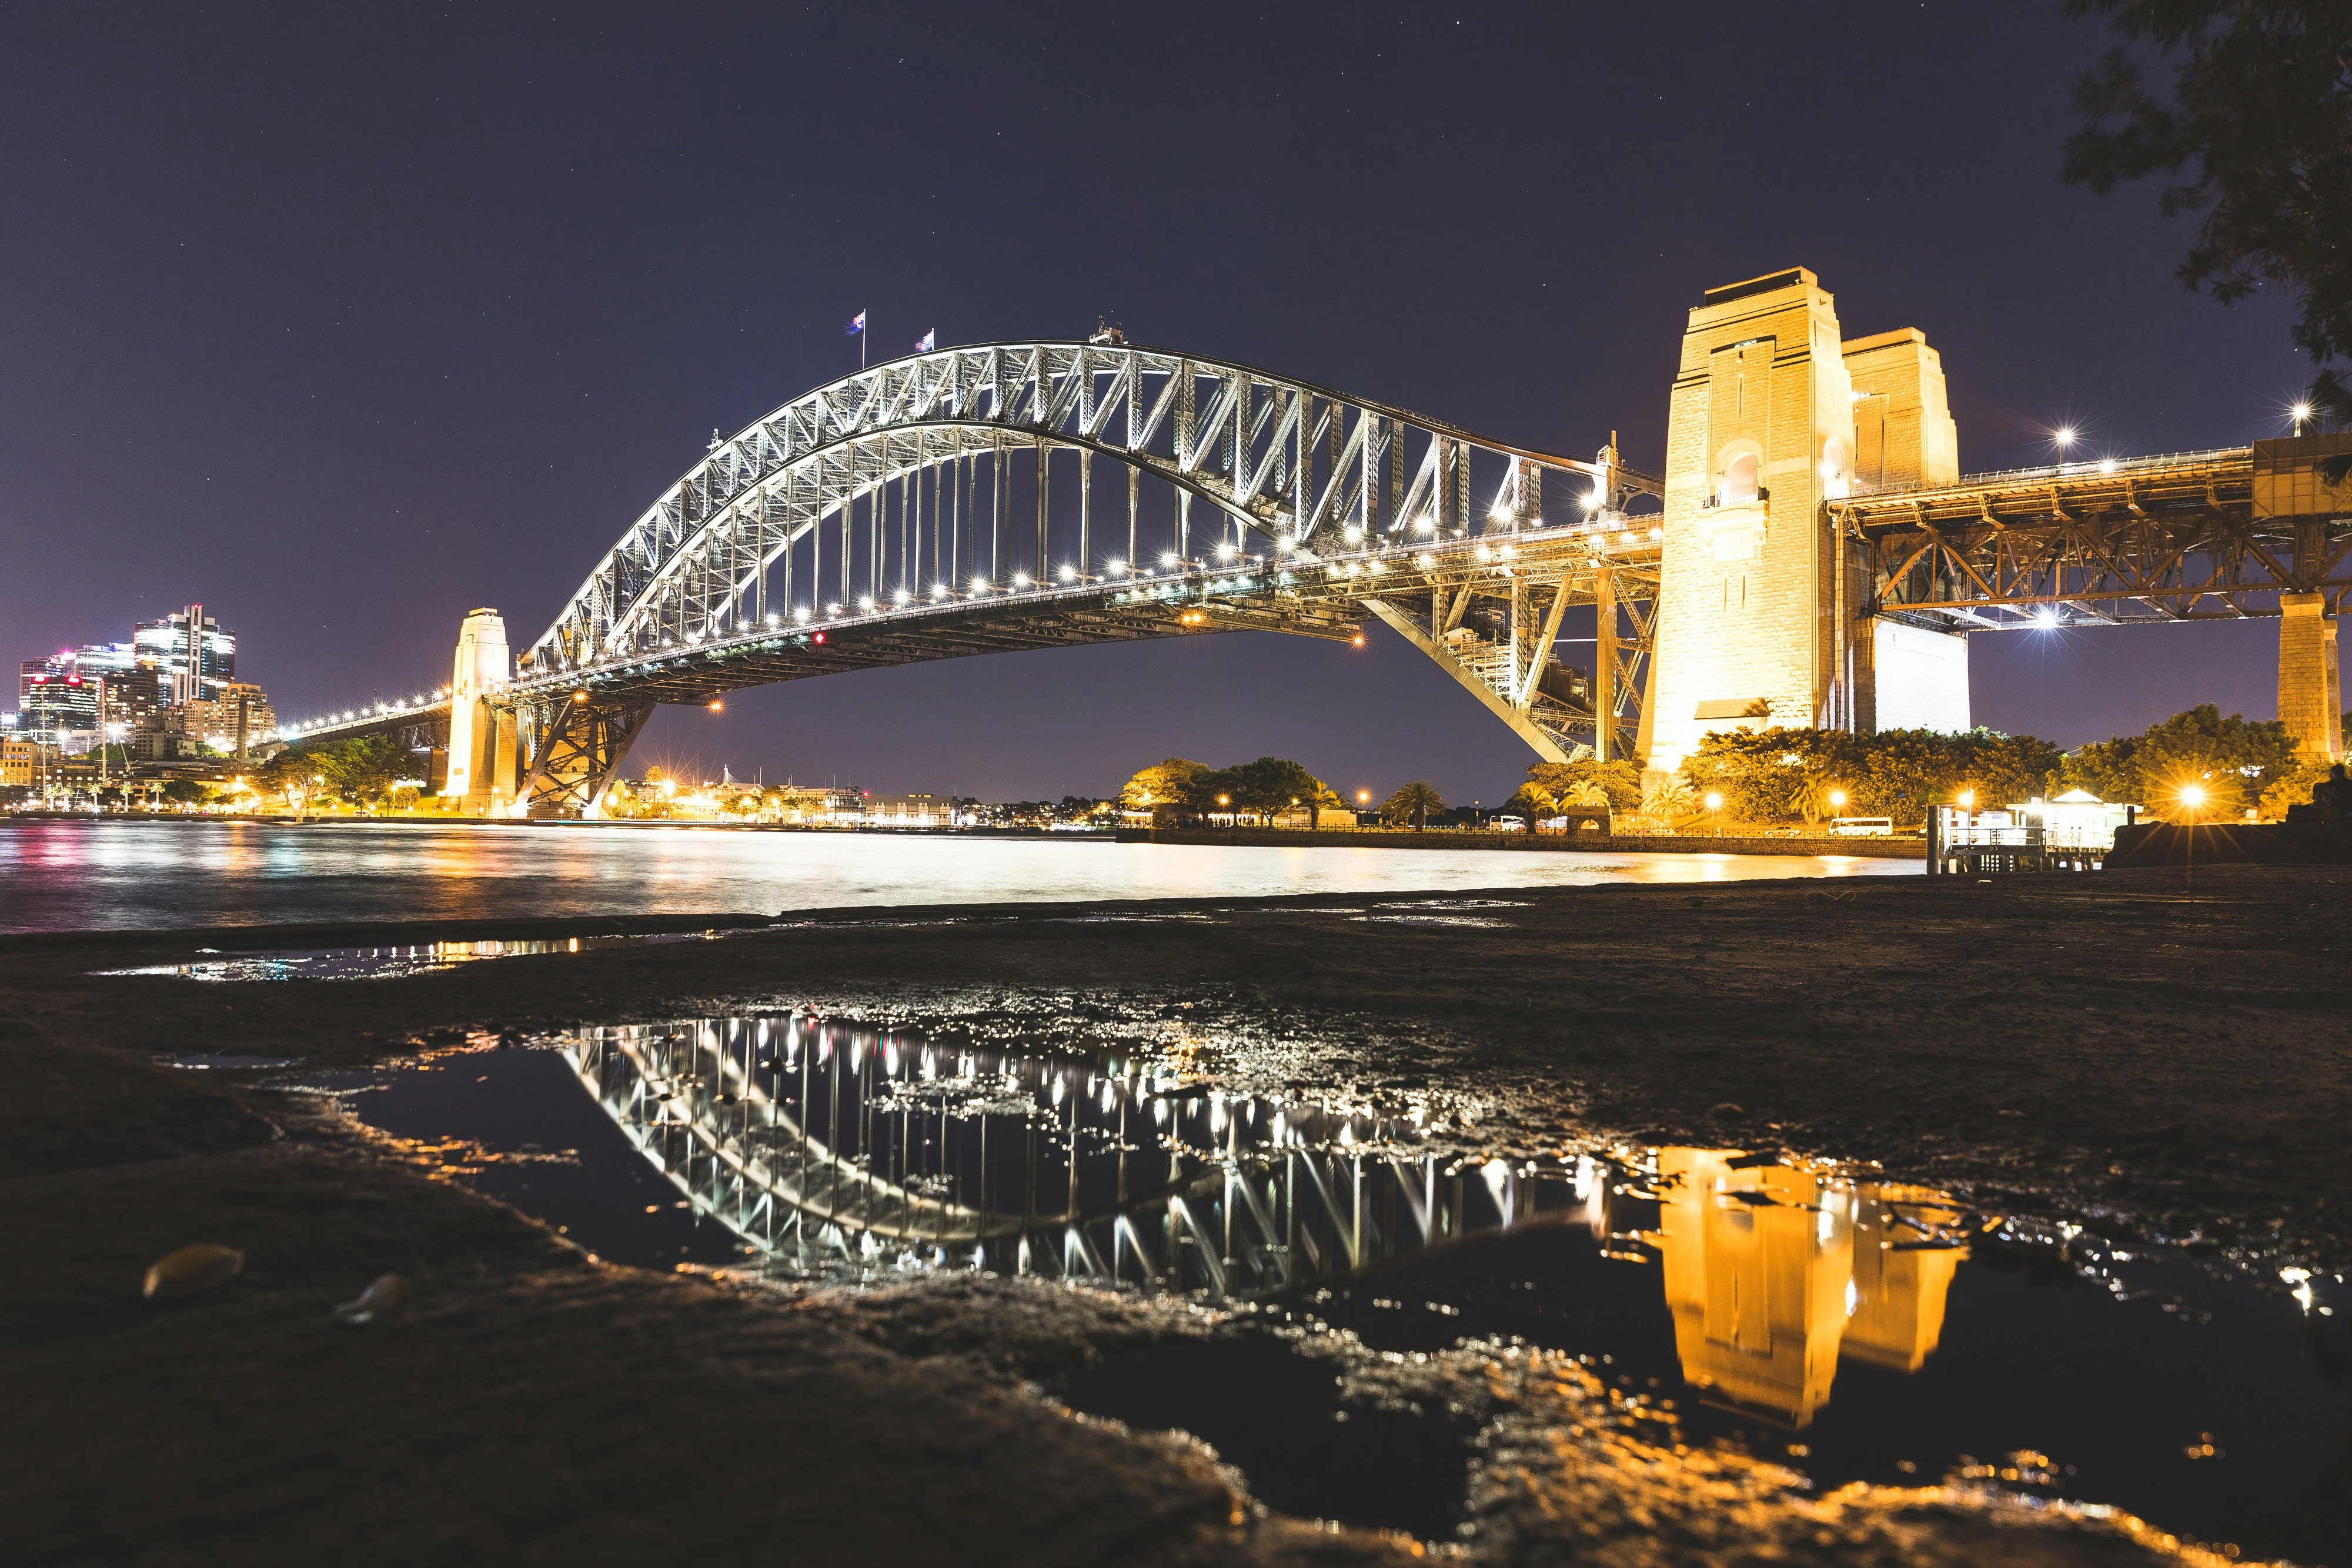 A picture of Sydney Harbour Bridge at night, illuminated by streetlamps